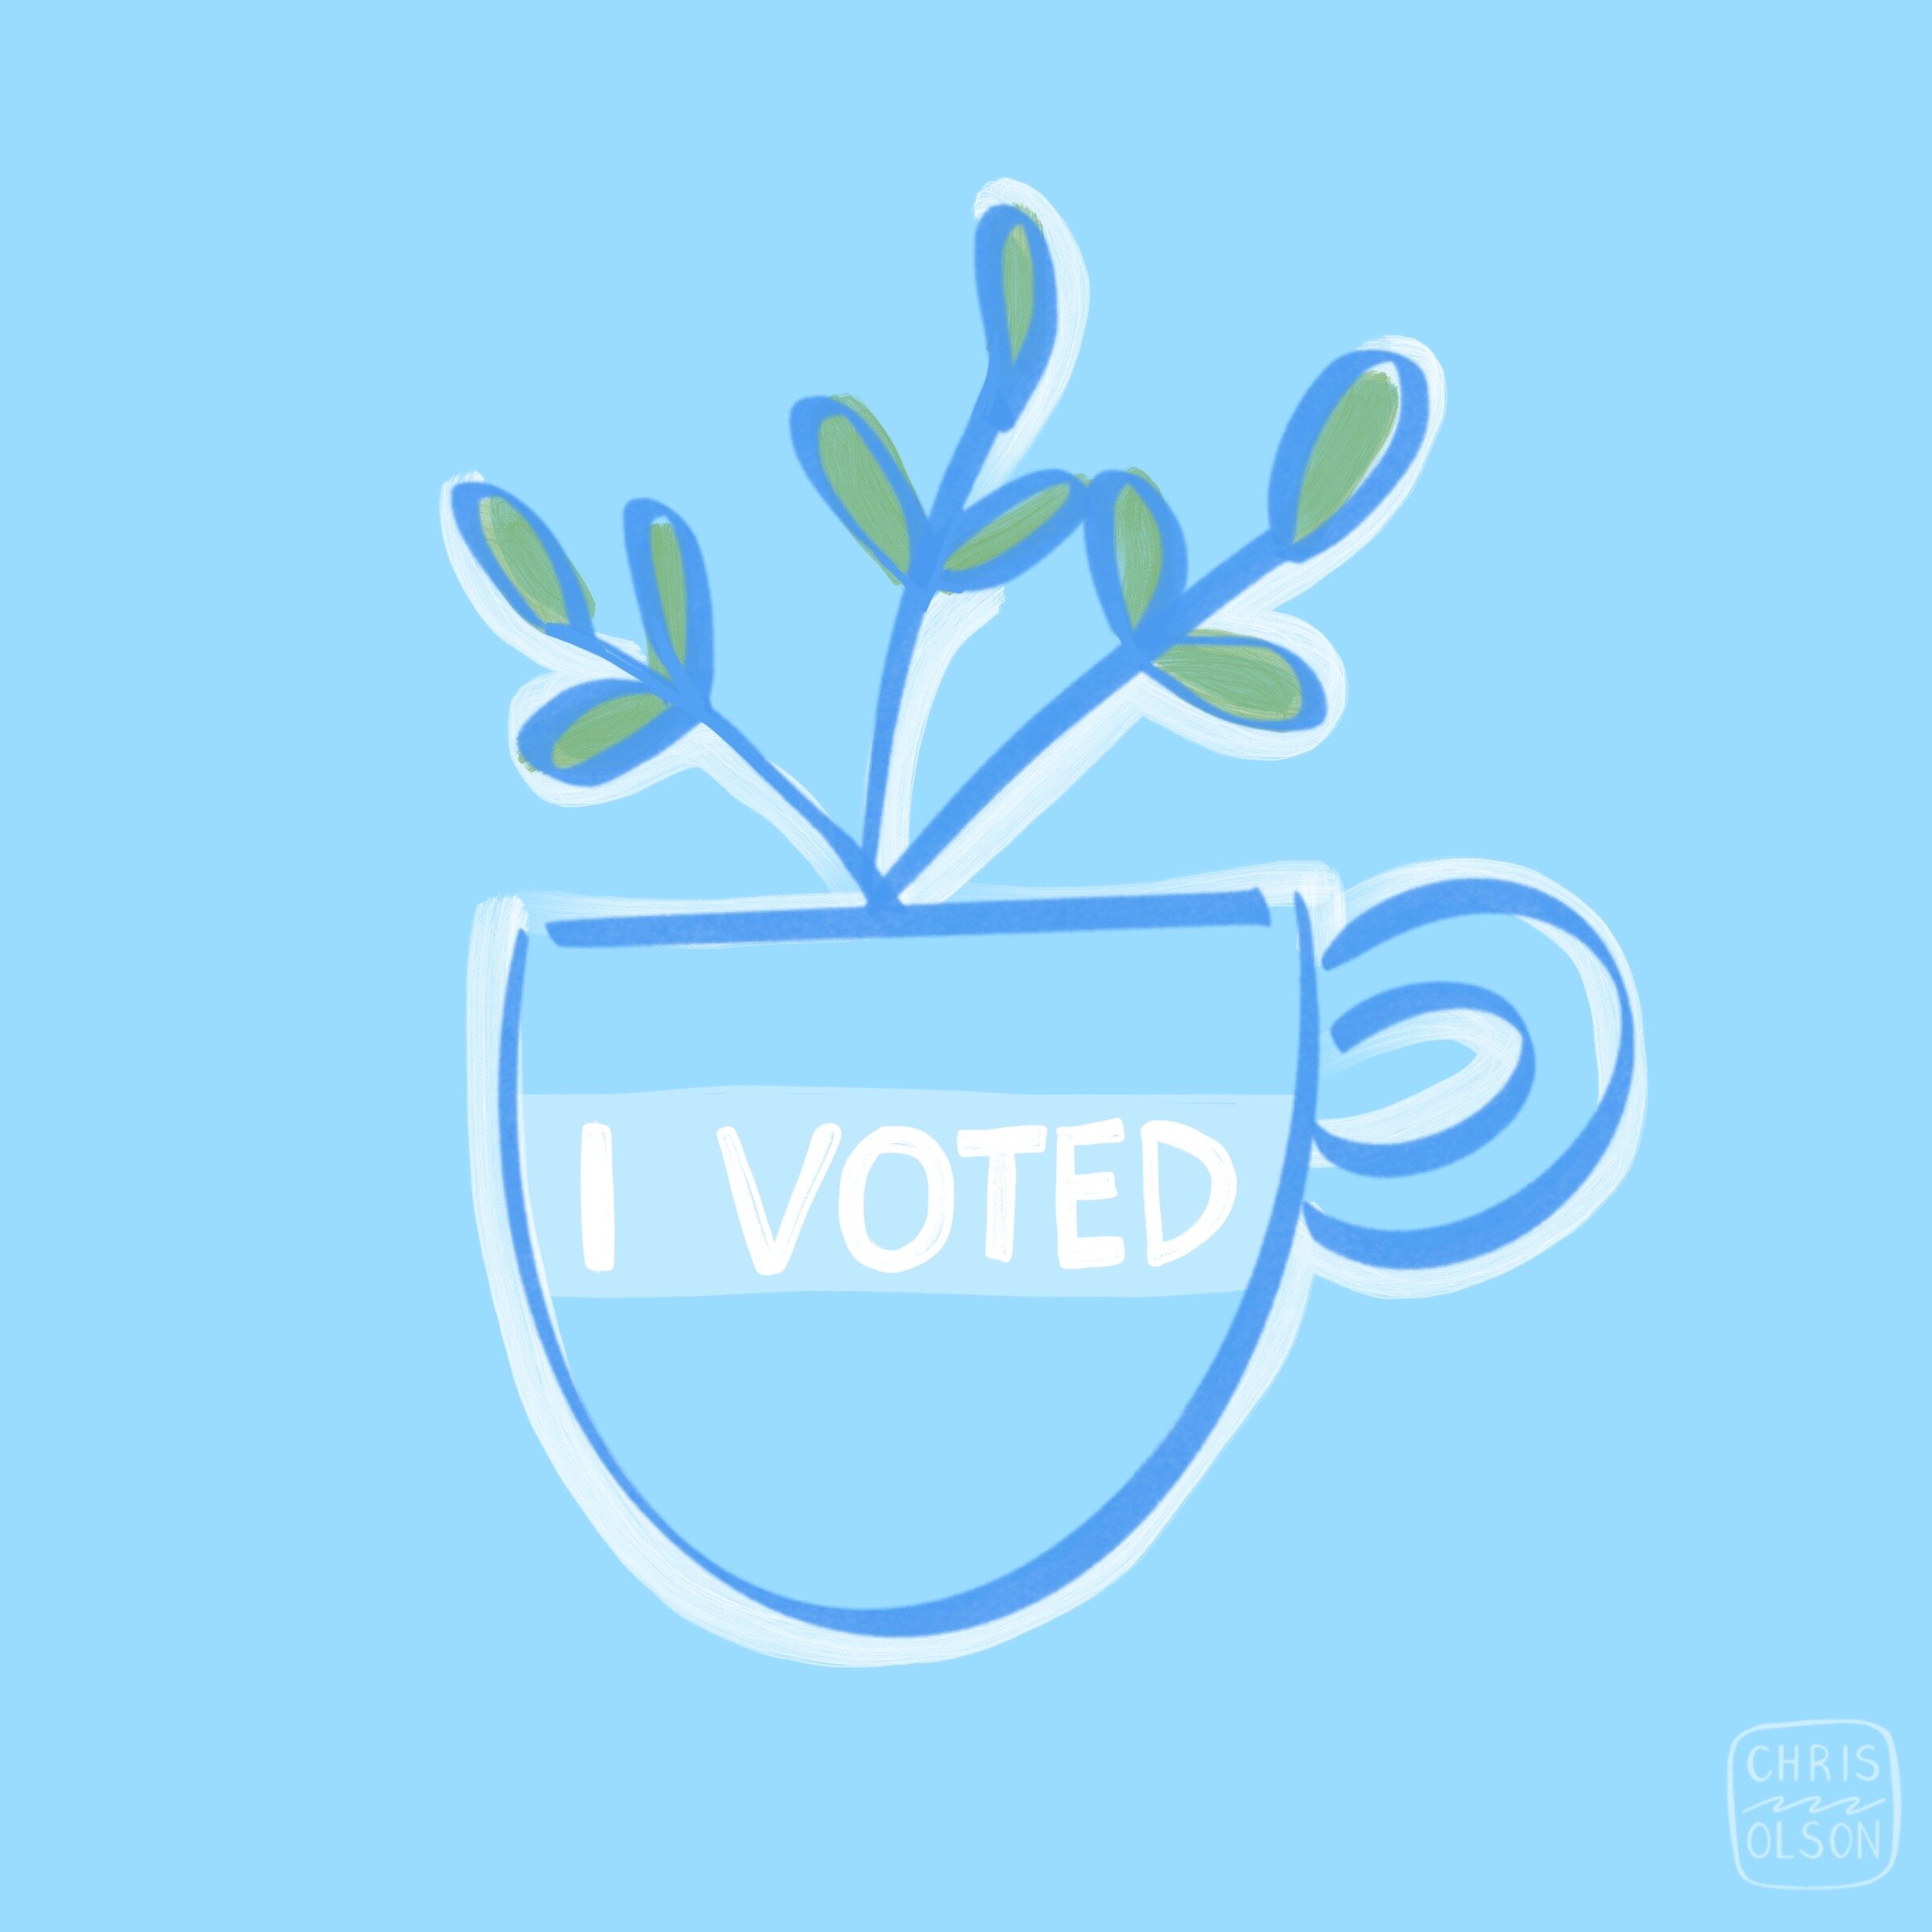 I voted spot illustration and lettering by Chris Olson